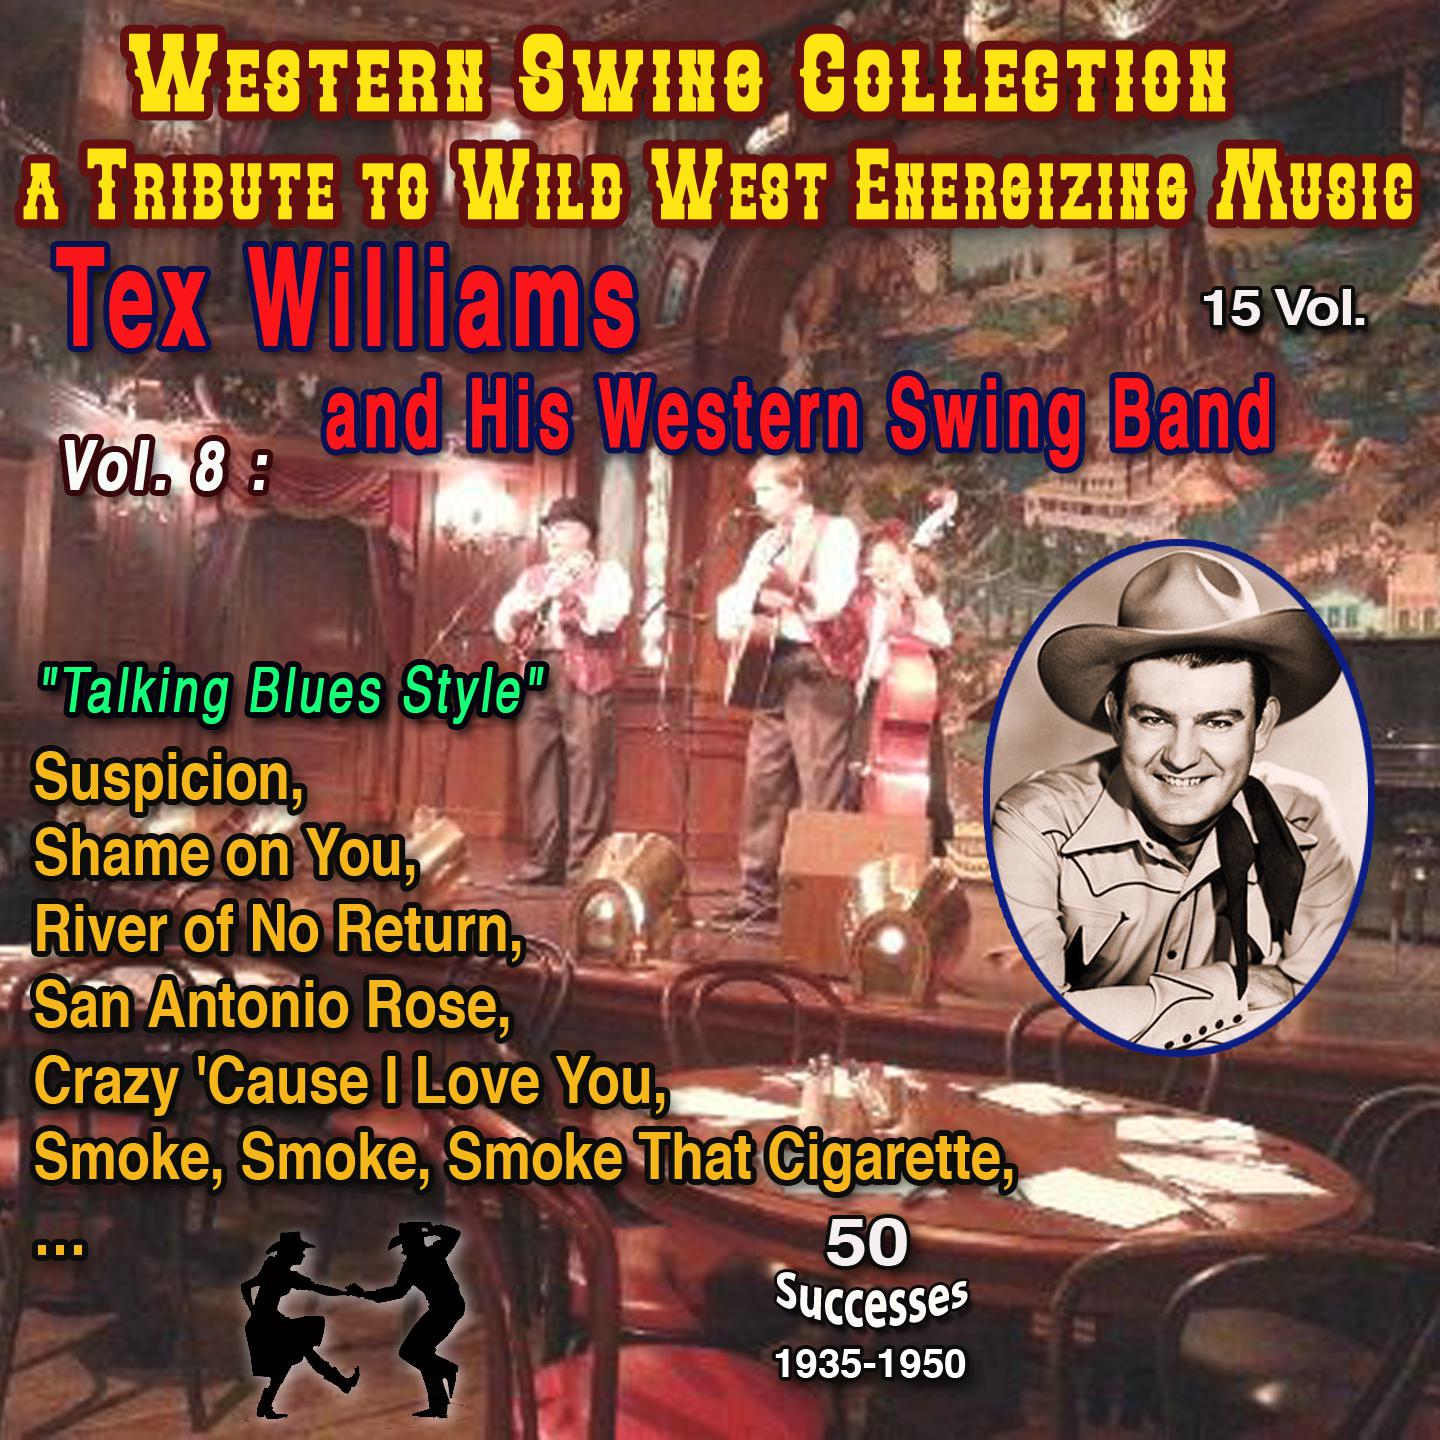 Постер альбома Western Swing Collection : a Tribute to Wild West Energizing Music : 15 Vol. Vol. 8 : Tex Williams and His Western Swing Band "The Man Who Sings Tobacco Best"